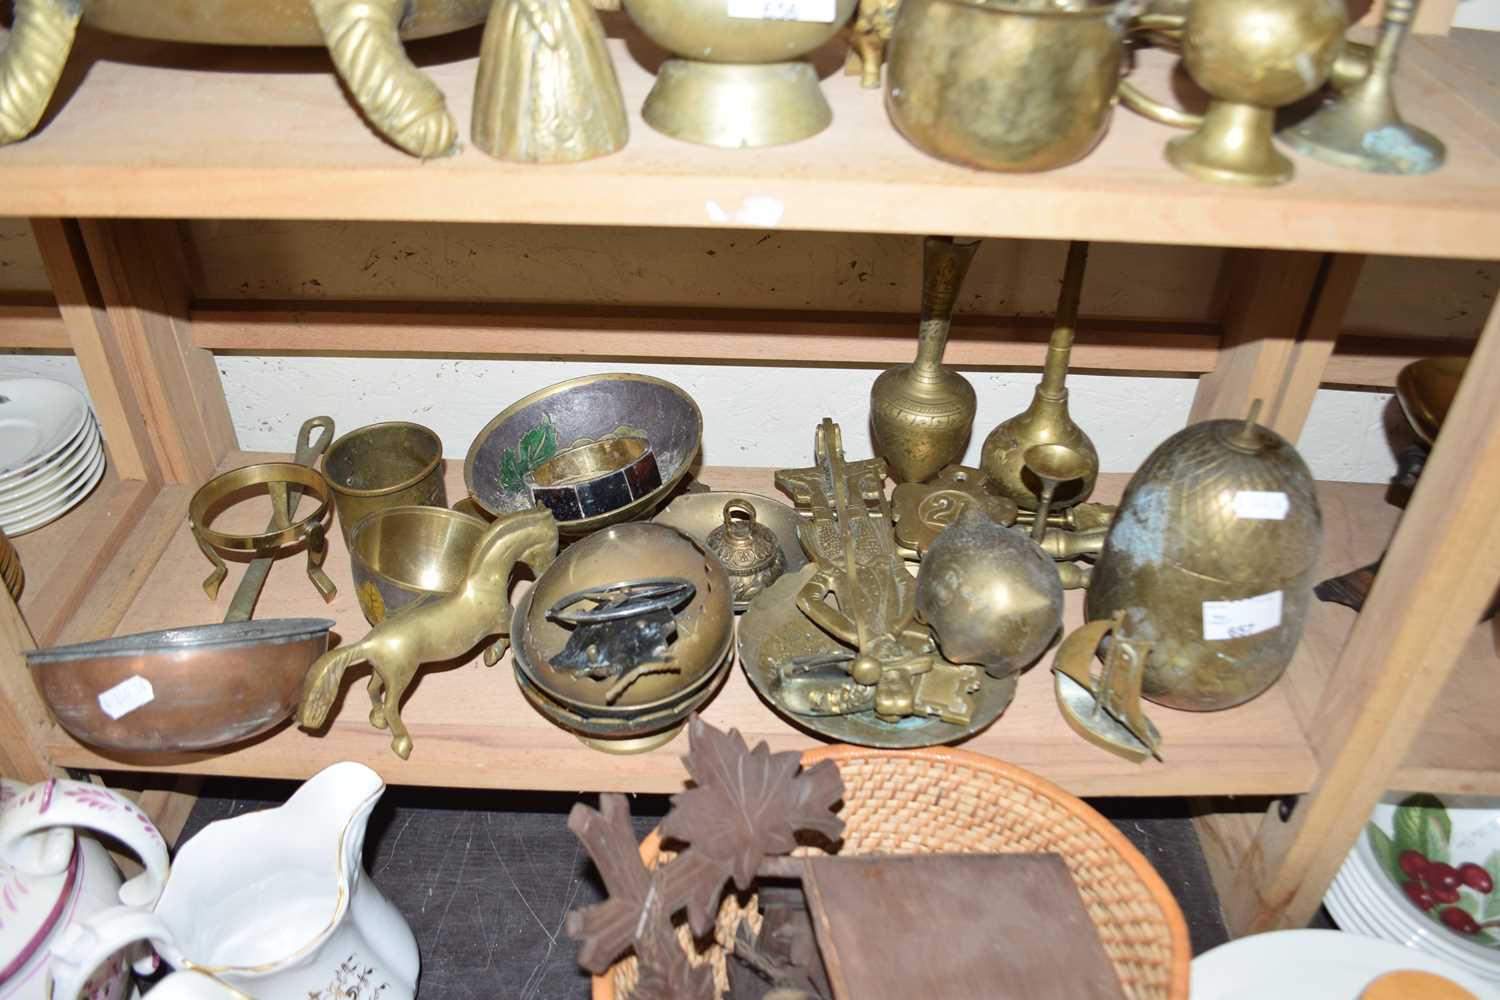 Mixed Lot: Brass and copper wares to include various vases, ornaments, bowls etc